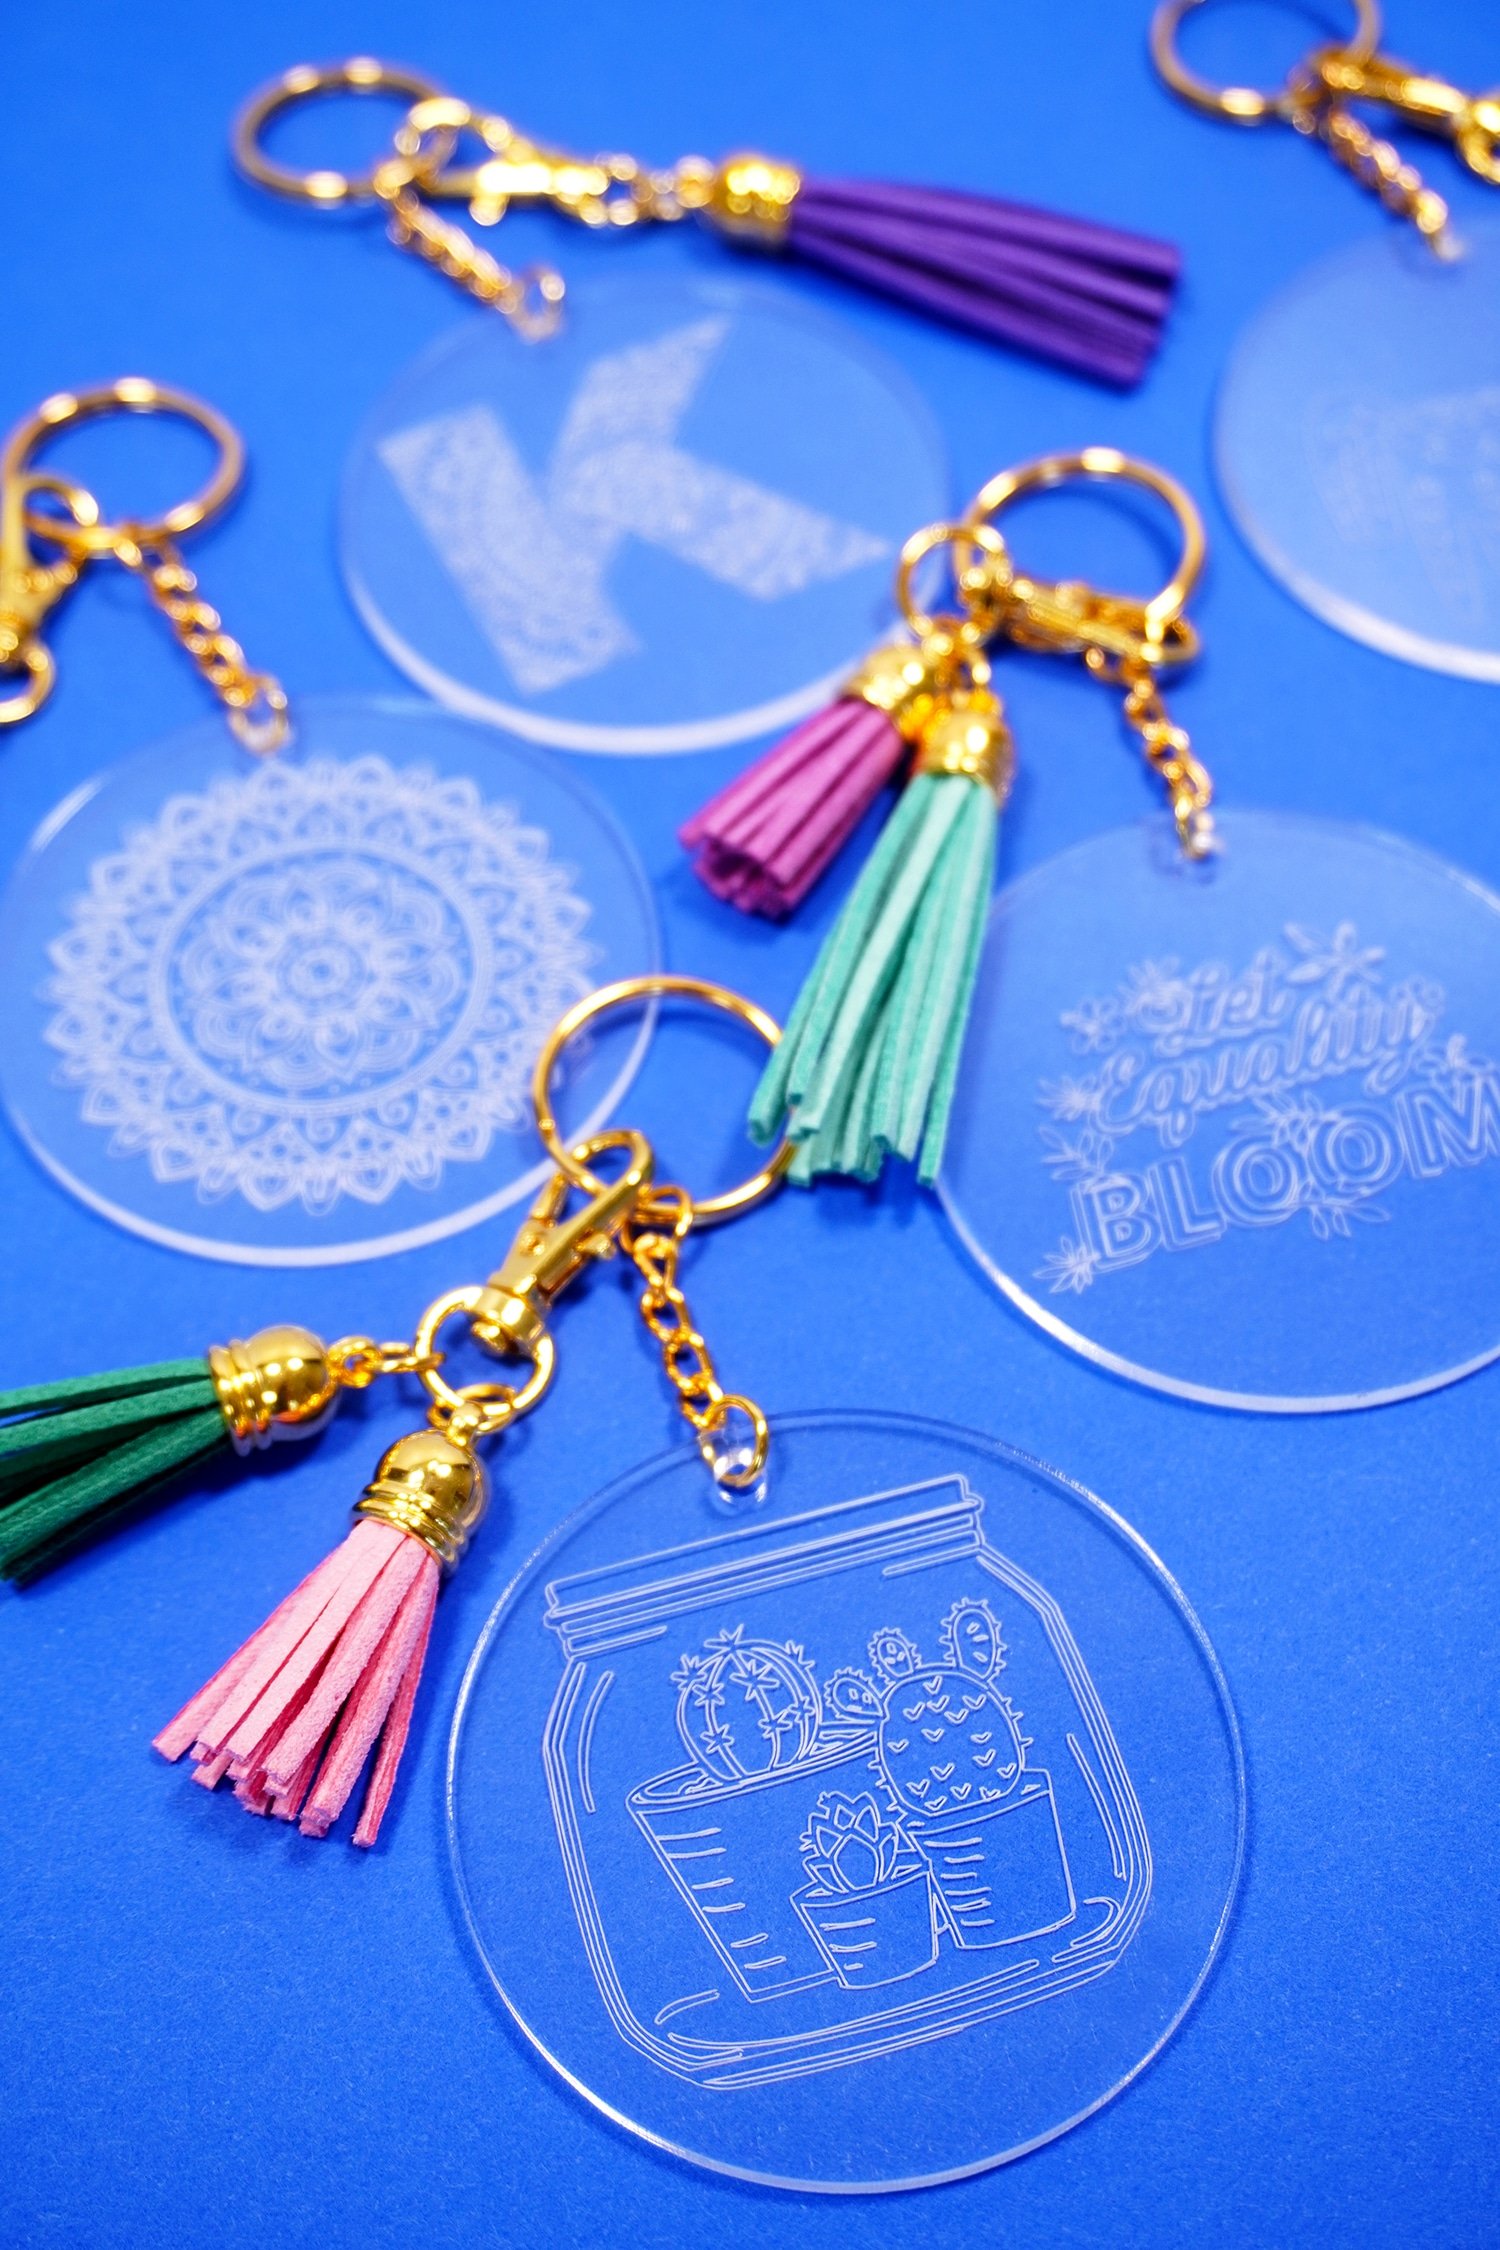 Engraved acrylic keychains with tassels on a blue background made with Cricut Maker Engraving Tool